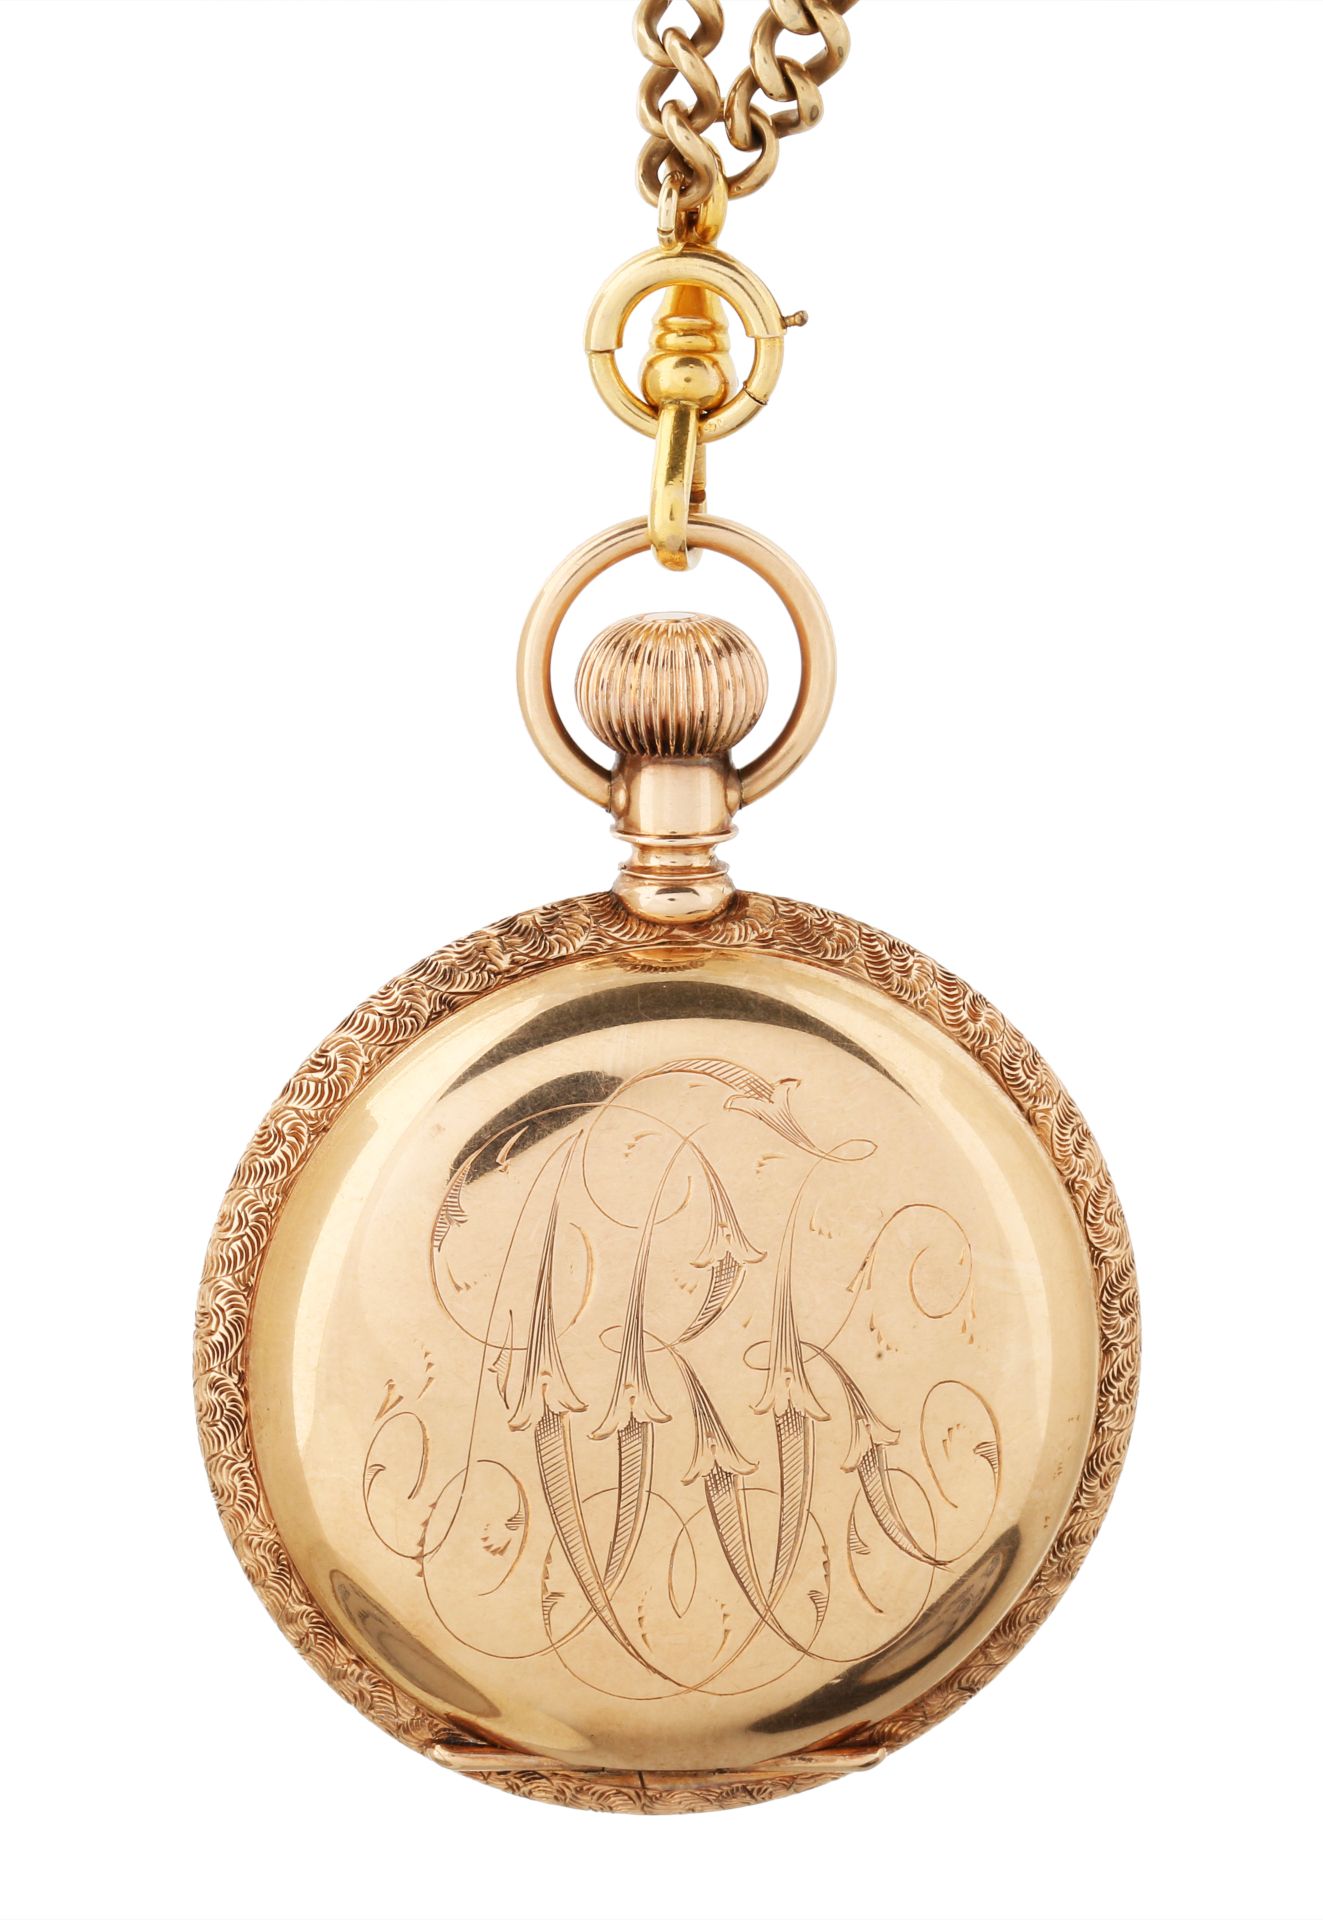 EROTIC AMERICAN WALTHAM 14K GOLD AND ENAMEL HUNTER CASE POCKET WATCH AND CHAIN, MOVEMENT NO. 5'506'7 - Image 3 of 7